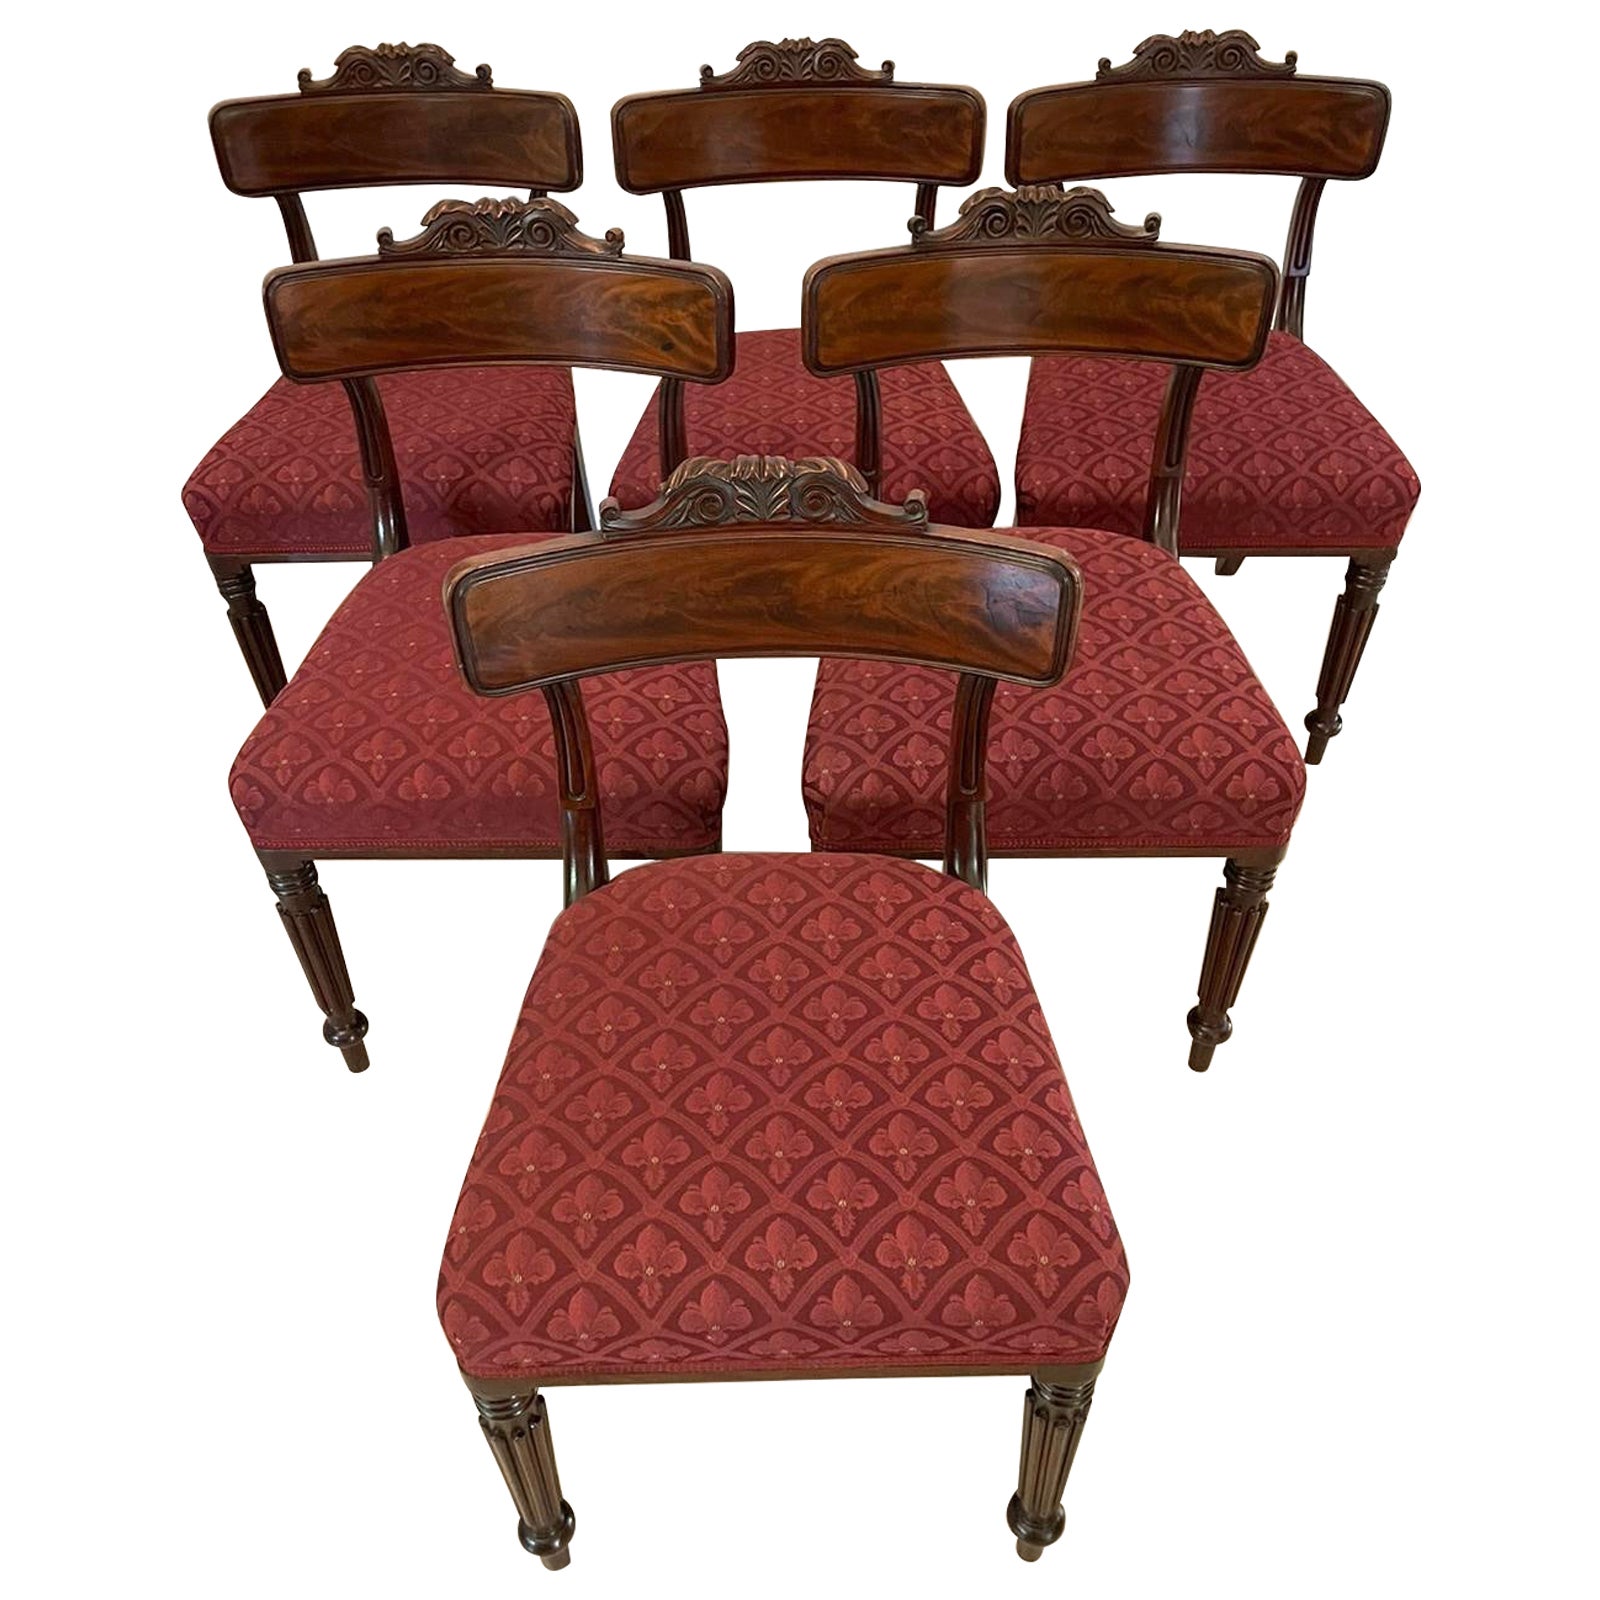 Fine Set of 6 Antique Regency Quality Mahogany Library Chairs by Gillows  For Sale